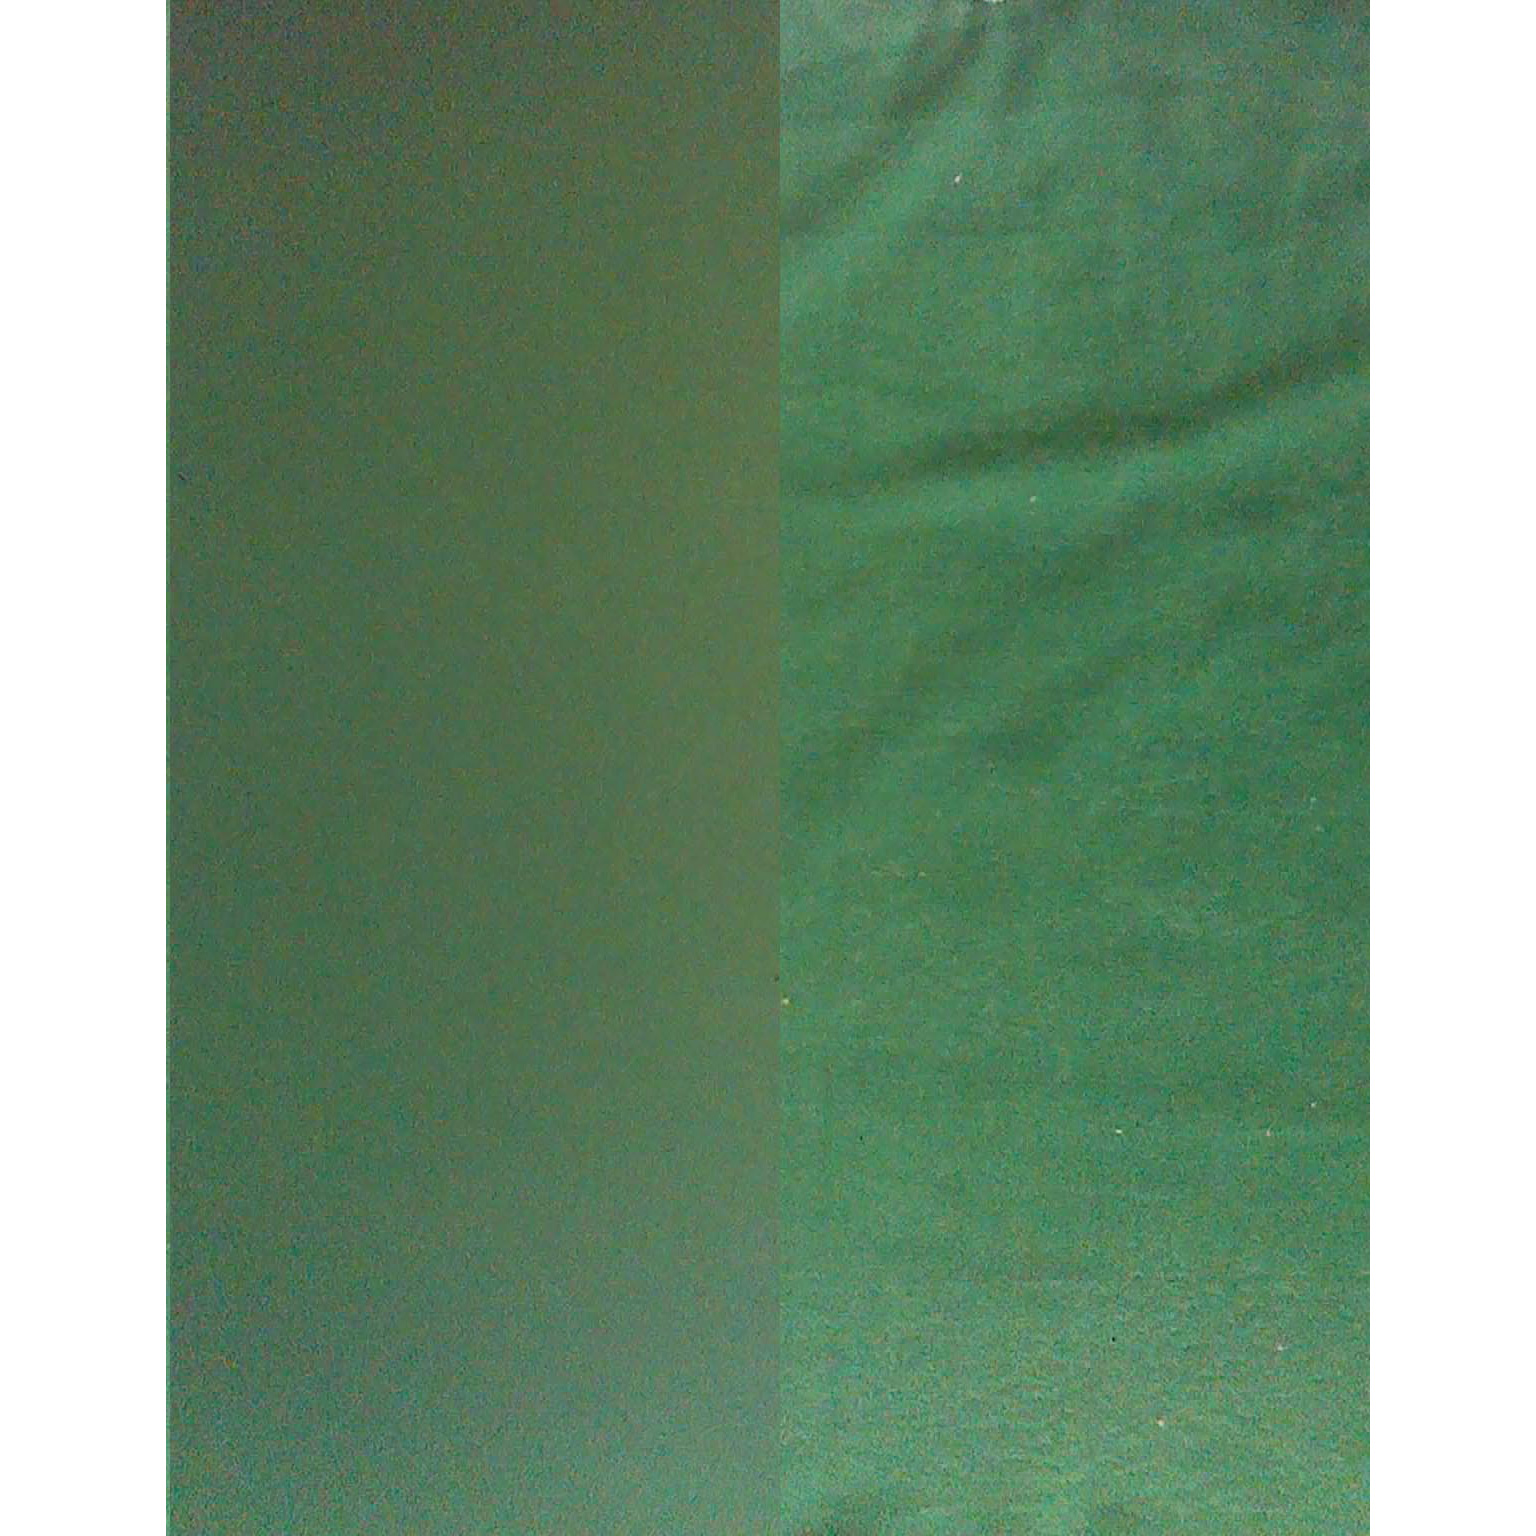 Poker cloth 2 sided solid color